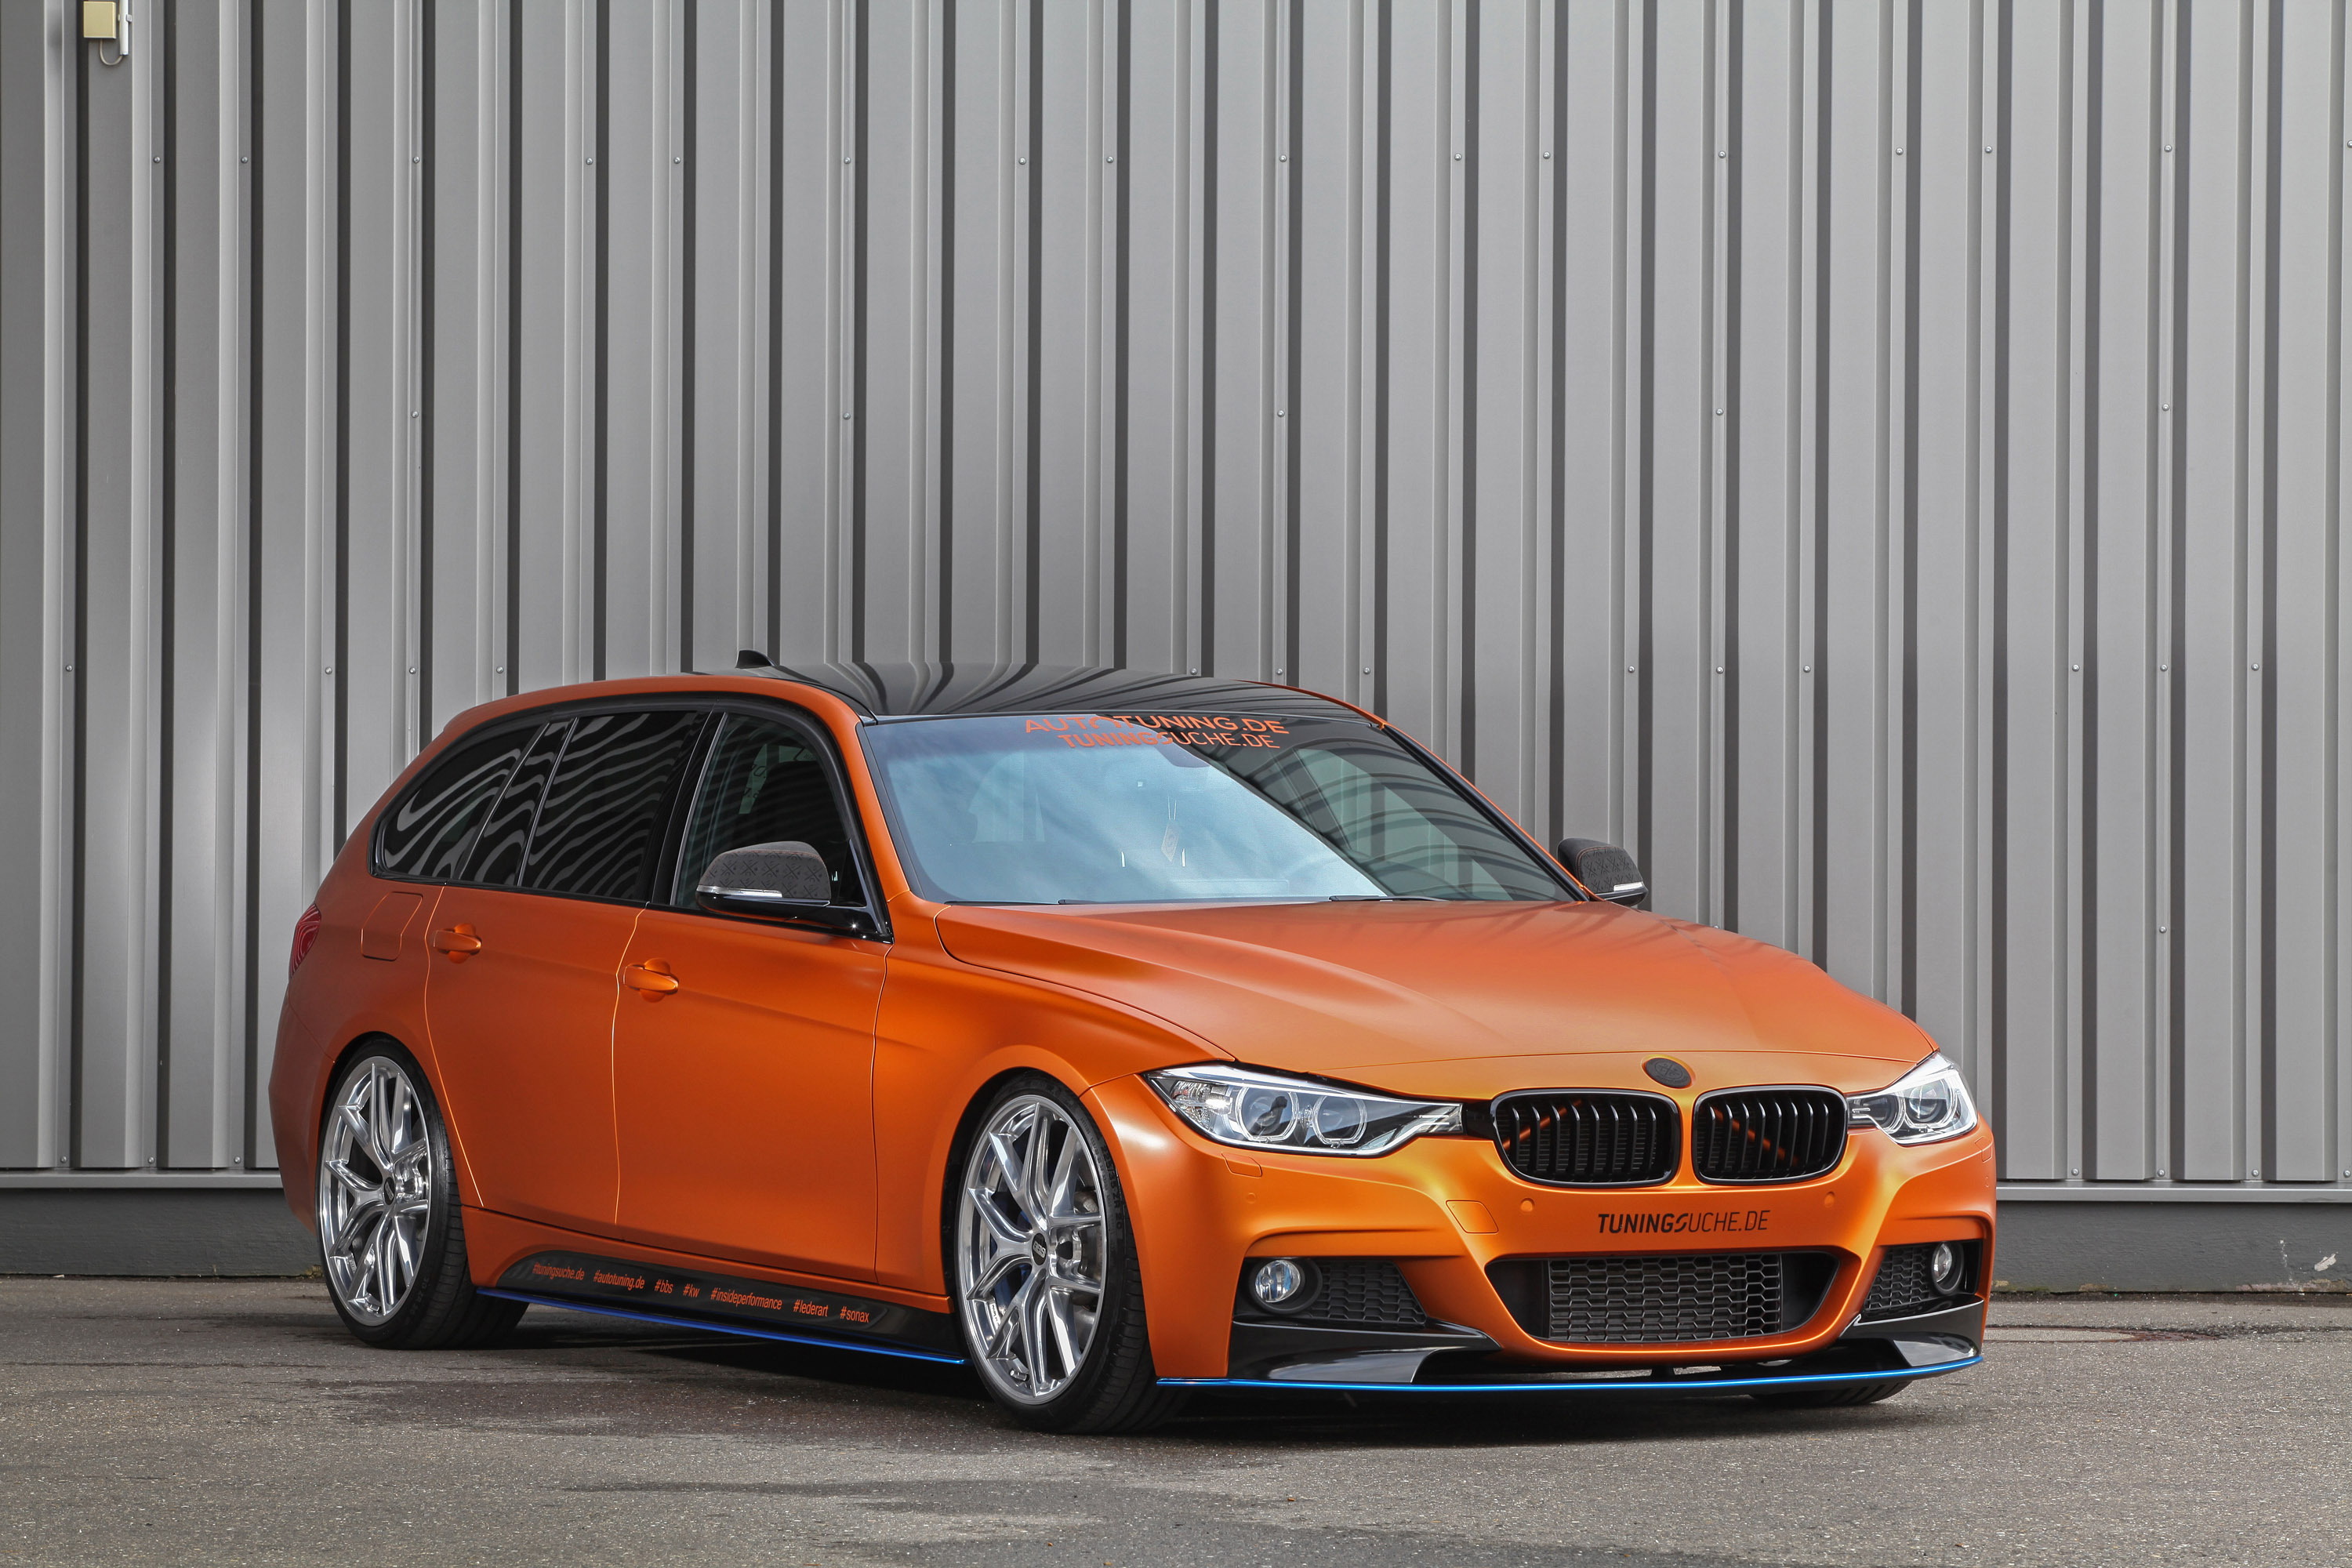 Tuningsuche to debut BMW 328i Touring F31